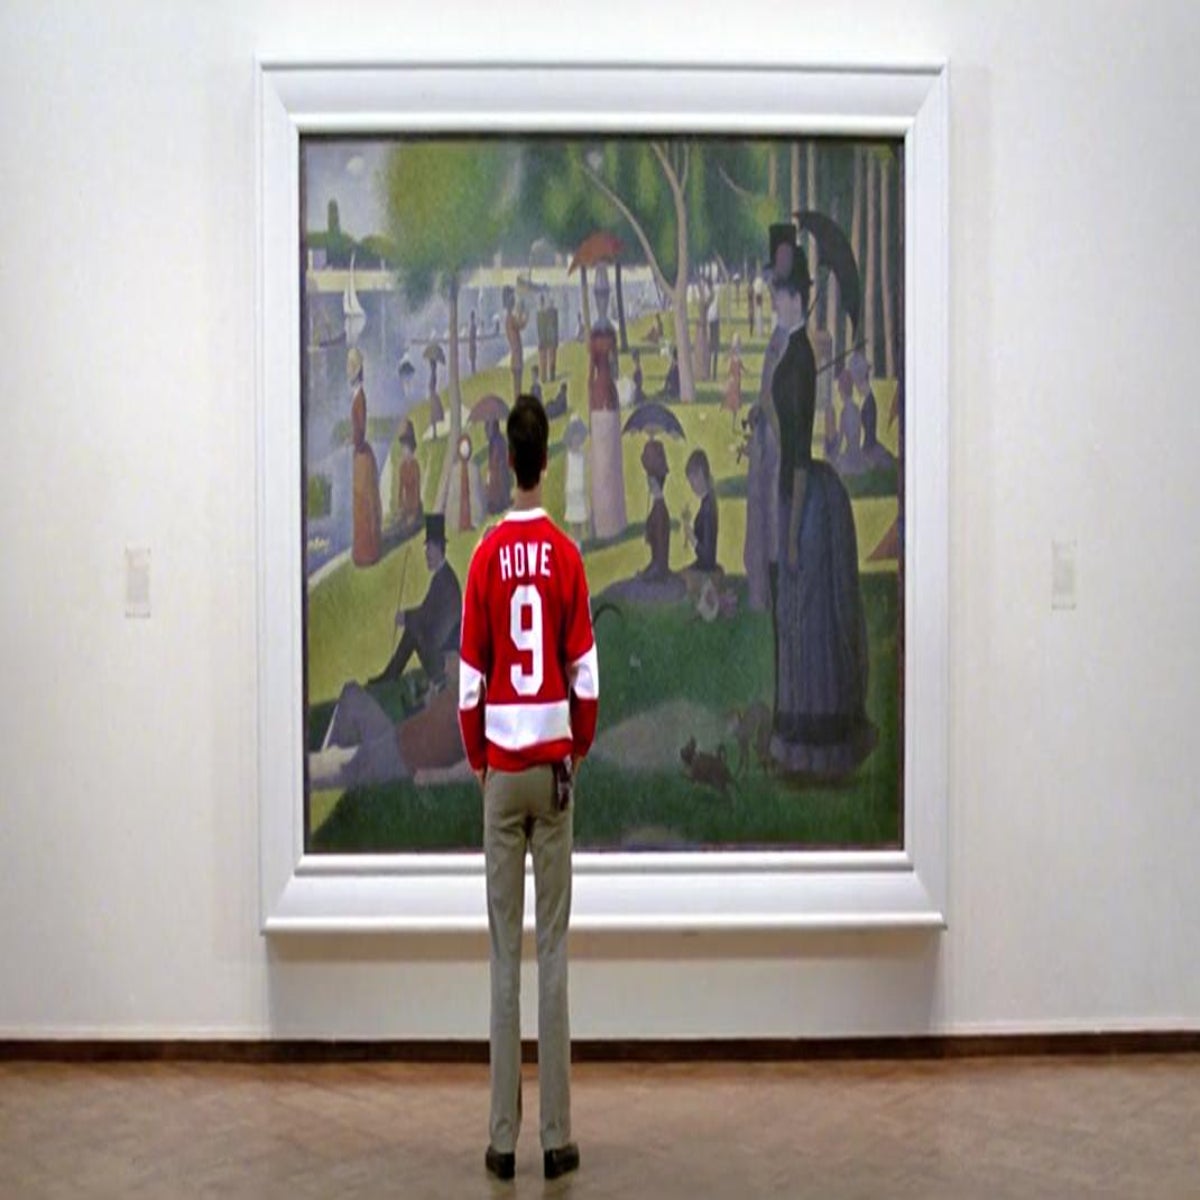 Cameron Frye's Detroit Red Wings Jersey From Ferris Bueller's Day Off